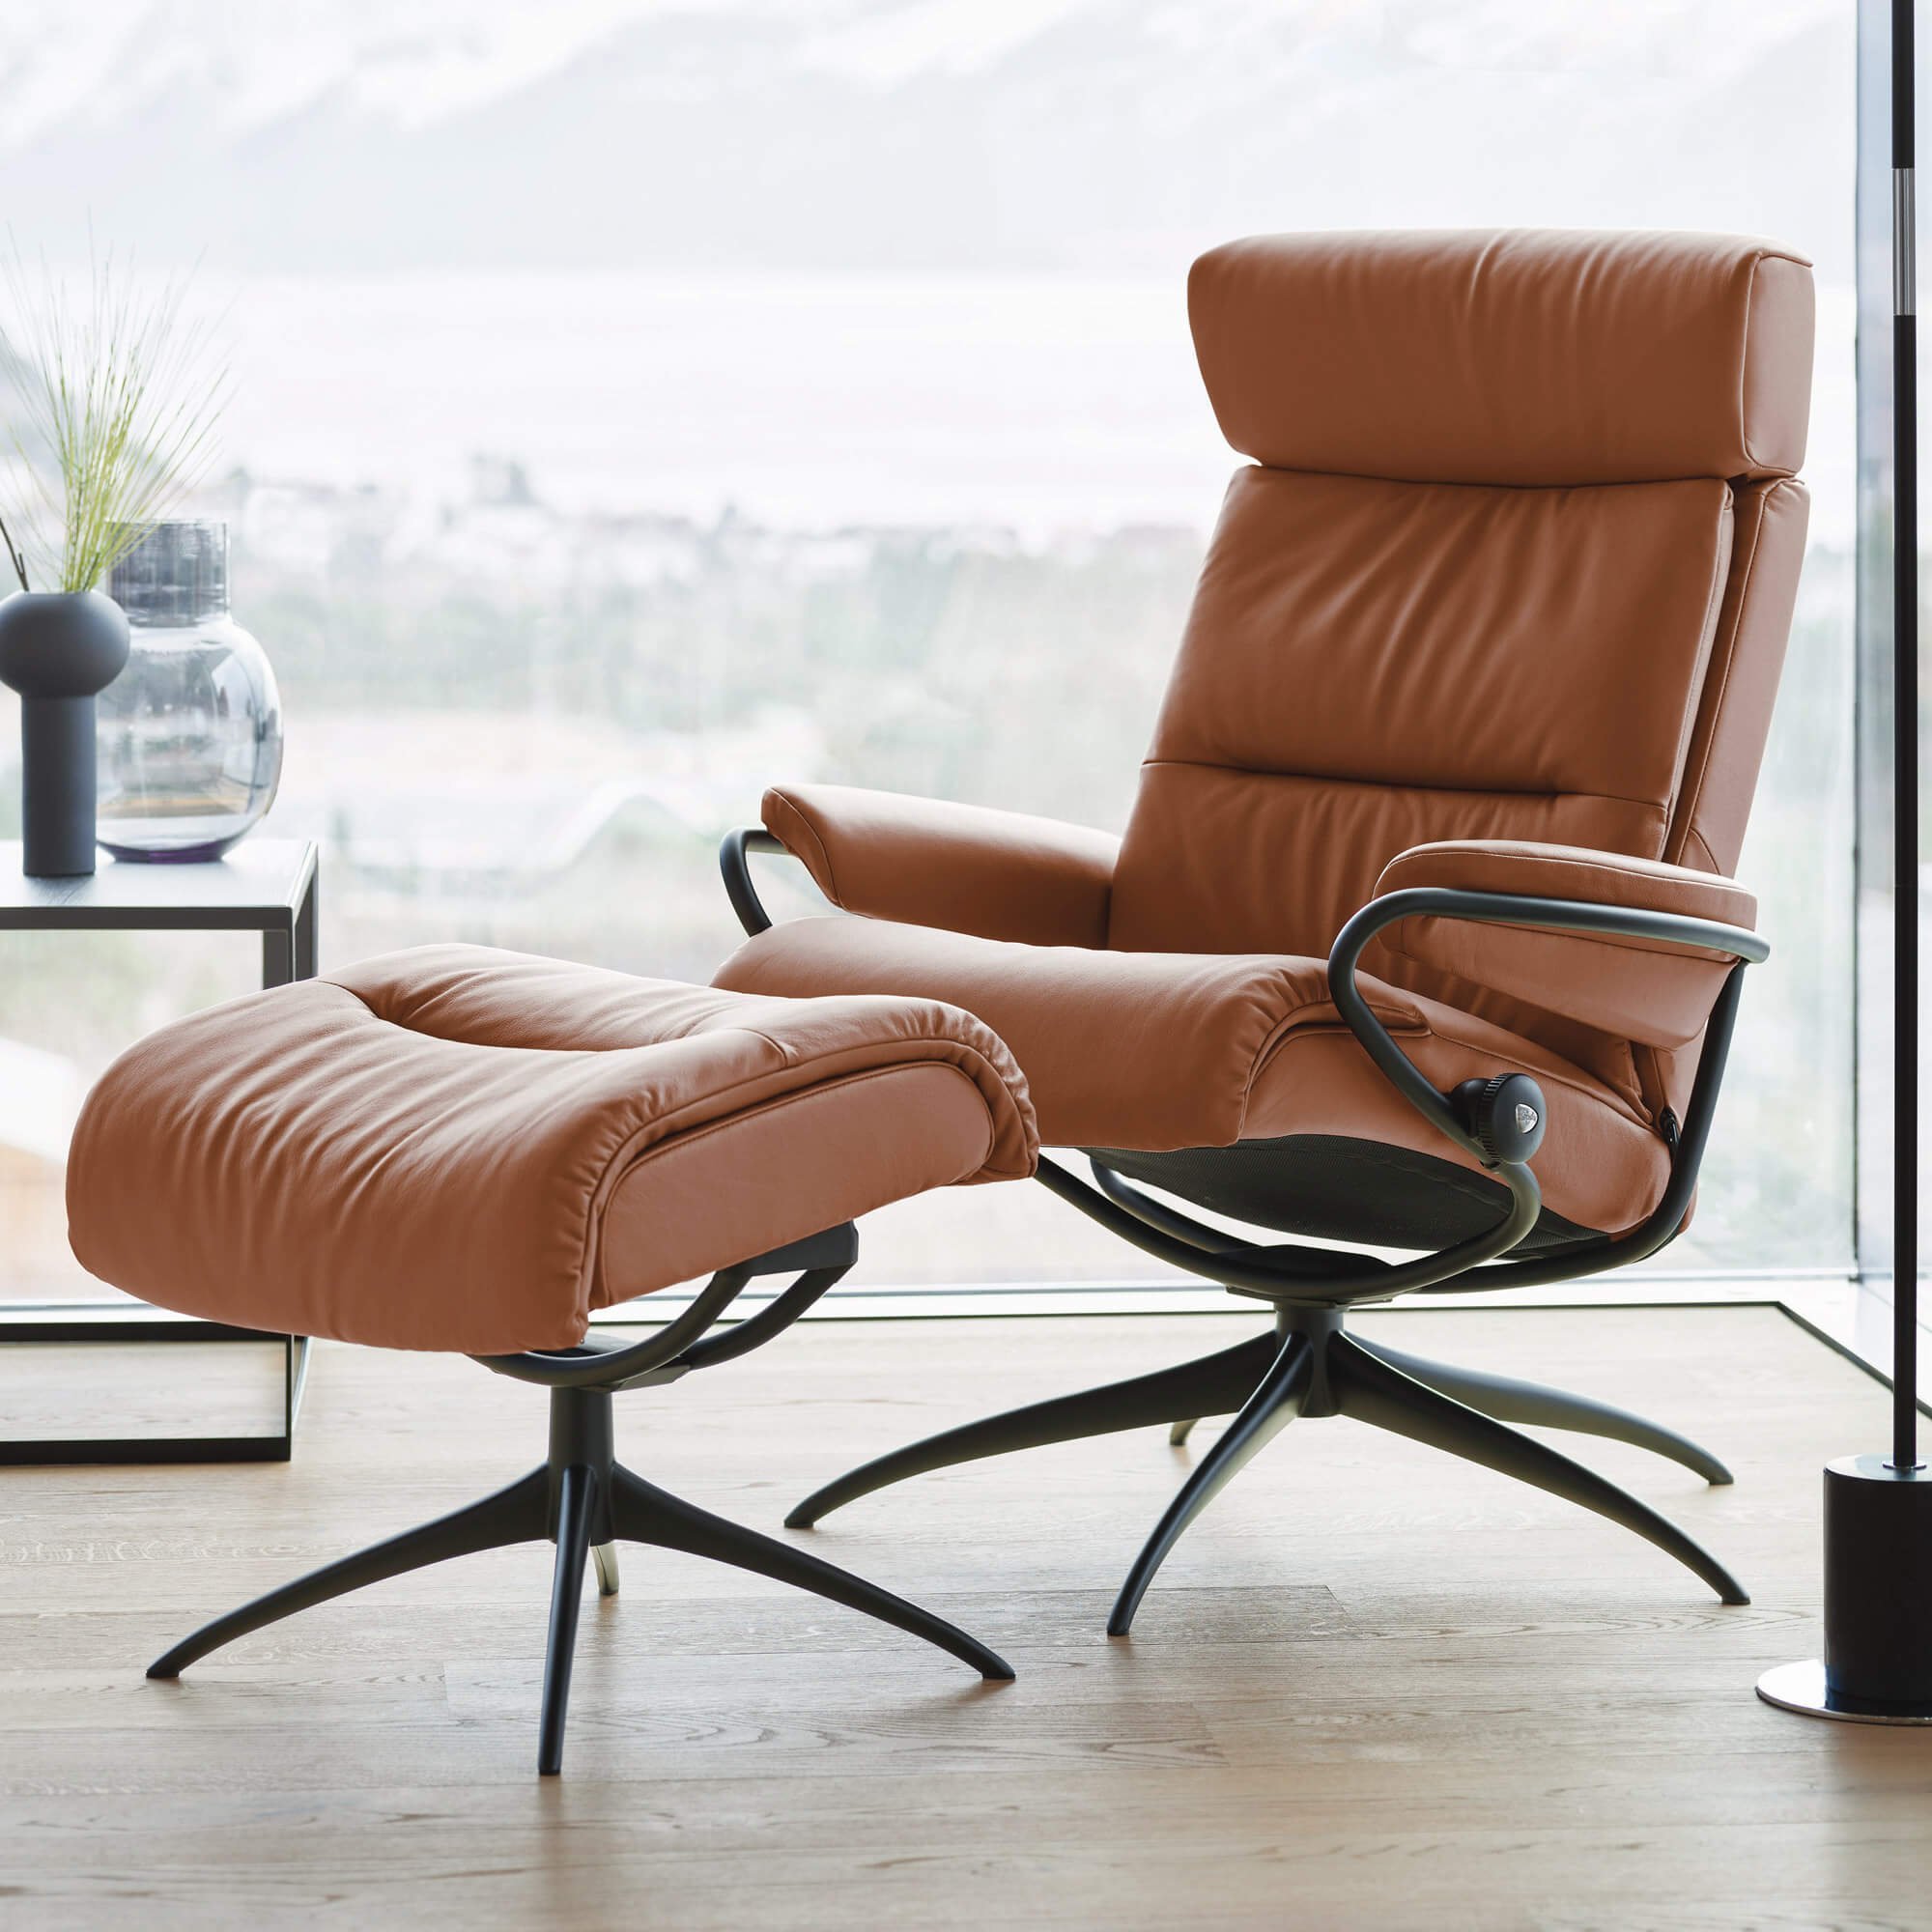 stressless chairs